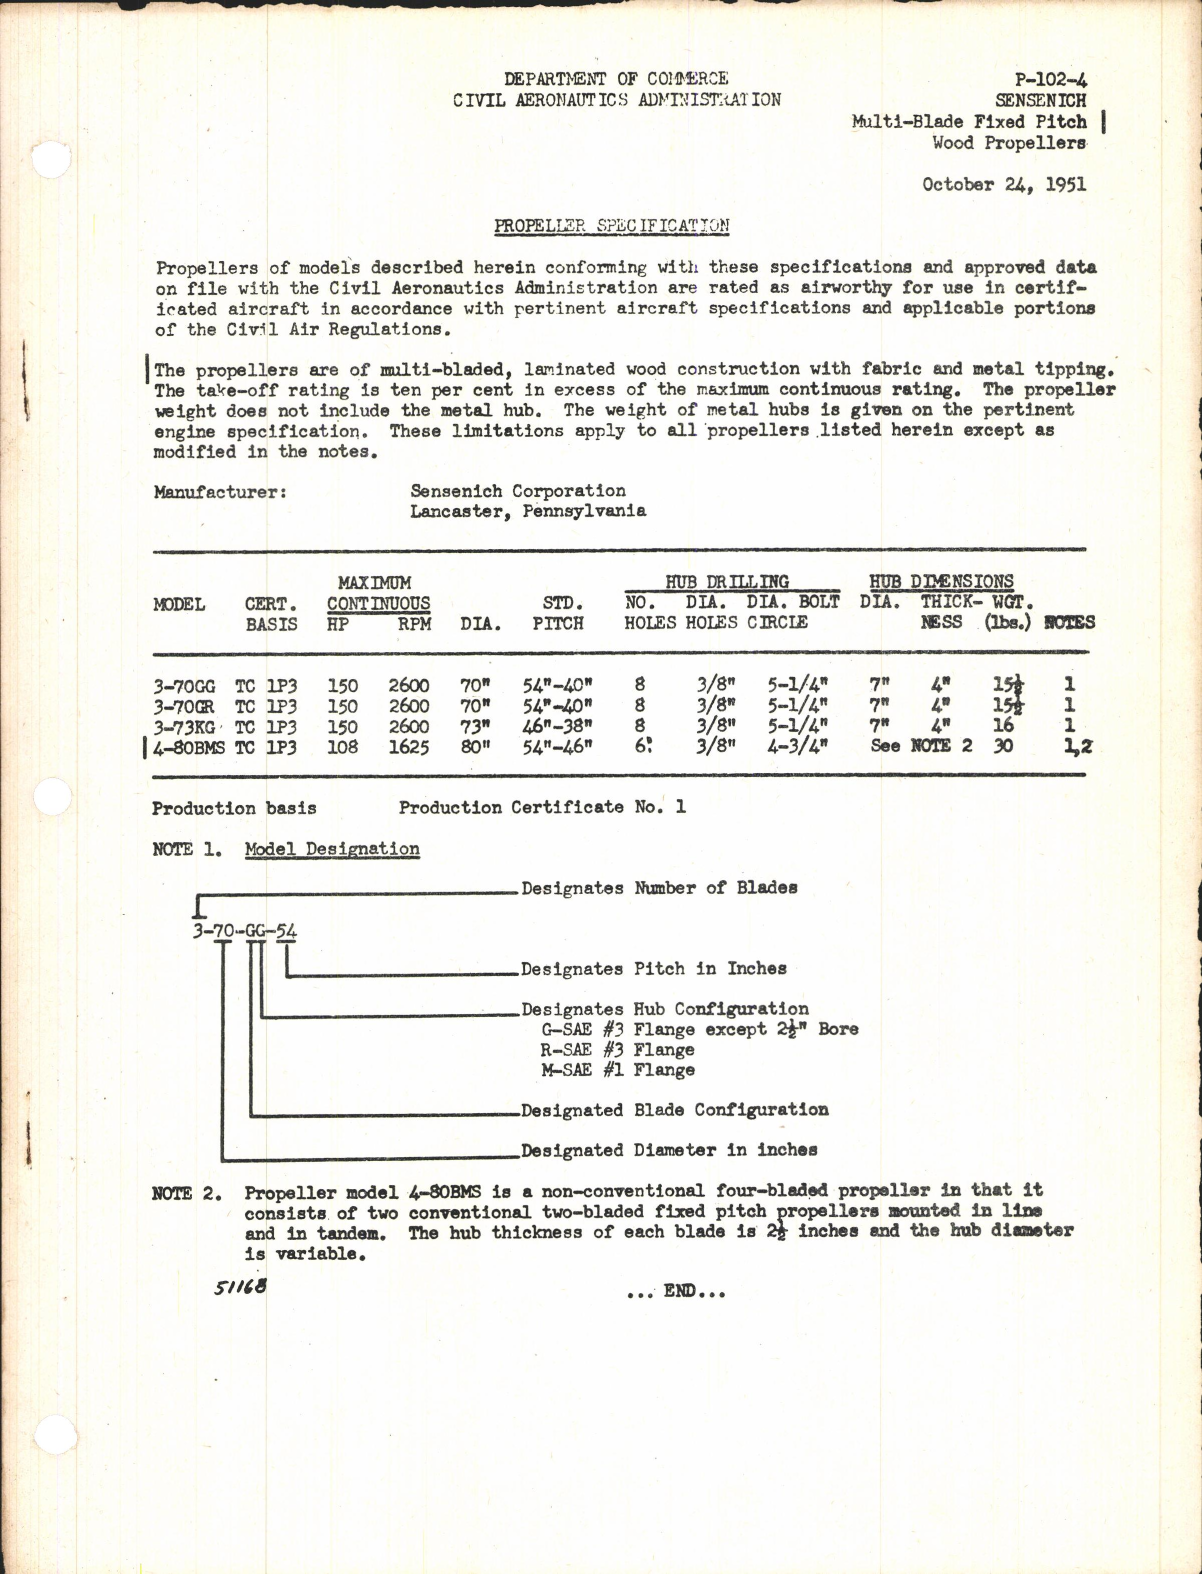 Sample page 1 from AirCorps Library document: Multi Blade Fixed Pitch Wood Propellers